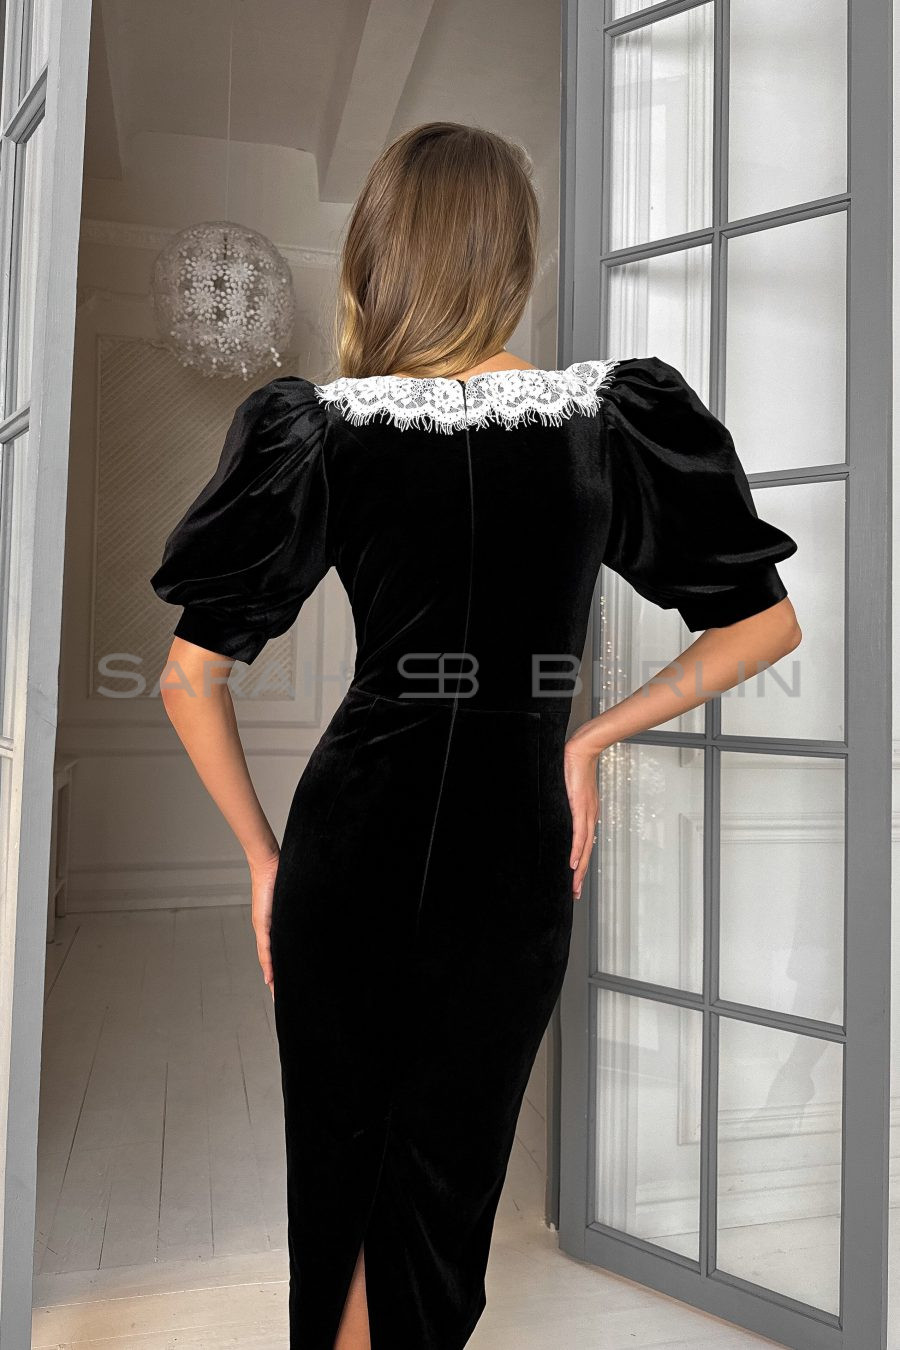 Velvet dress with lantern sleeves, with white lace